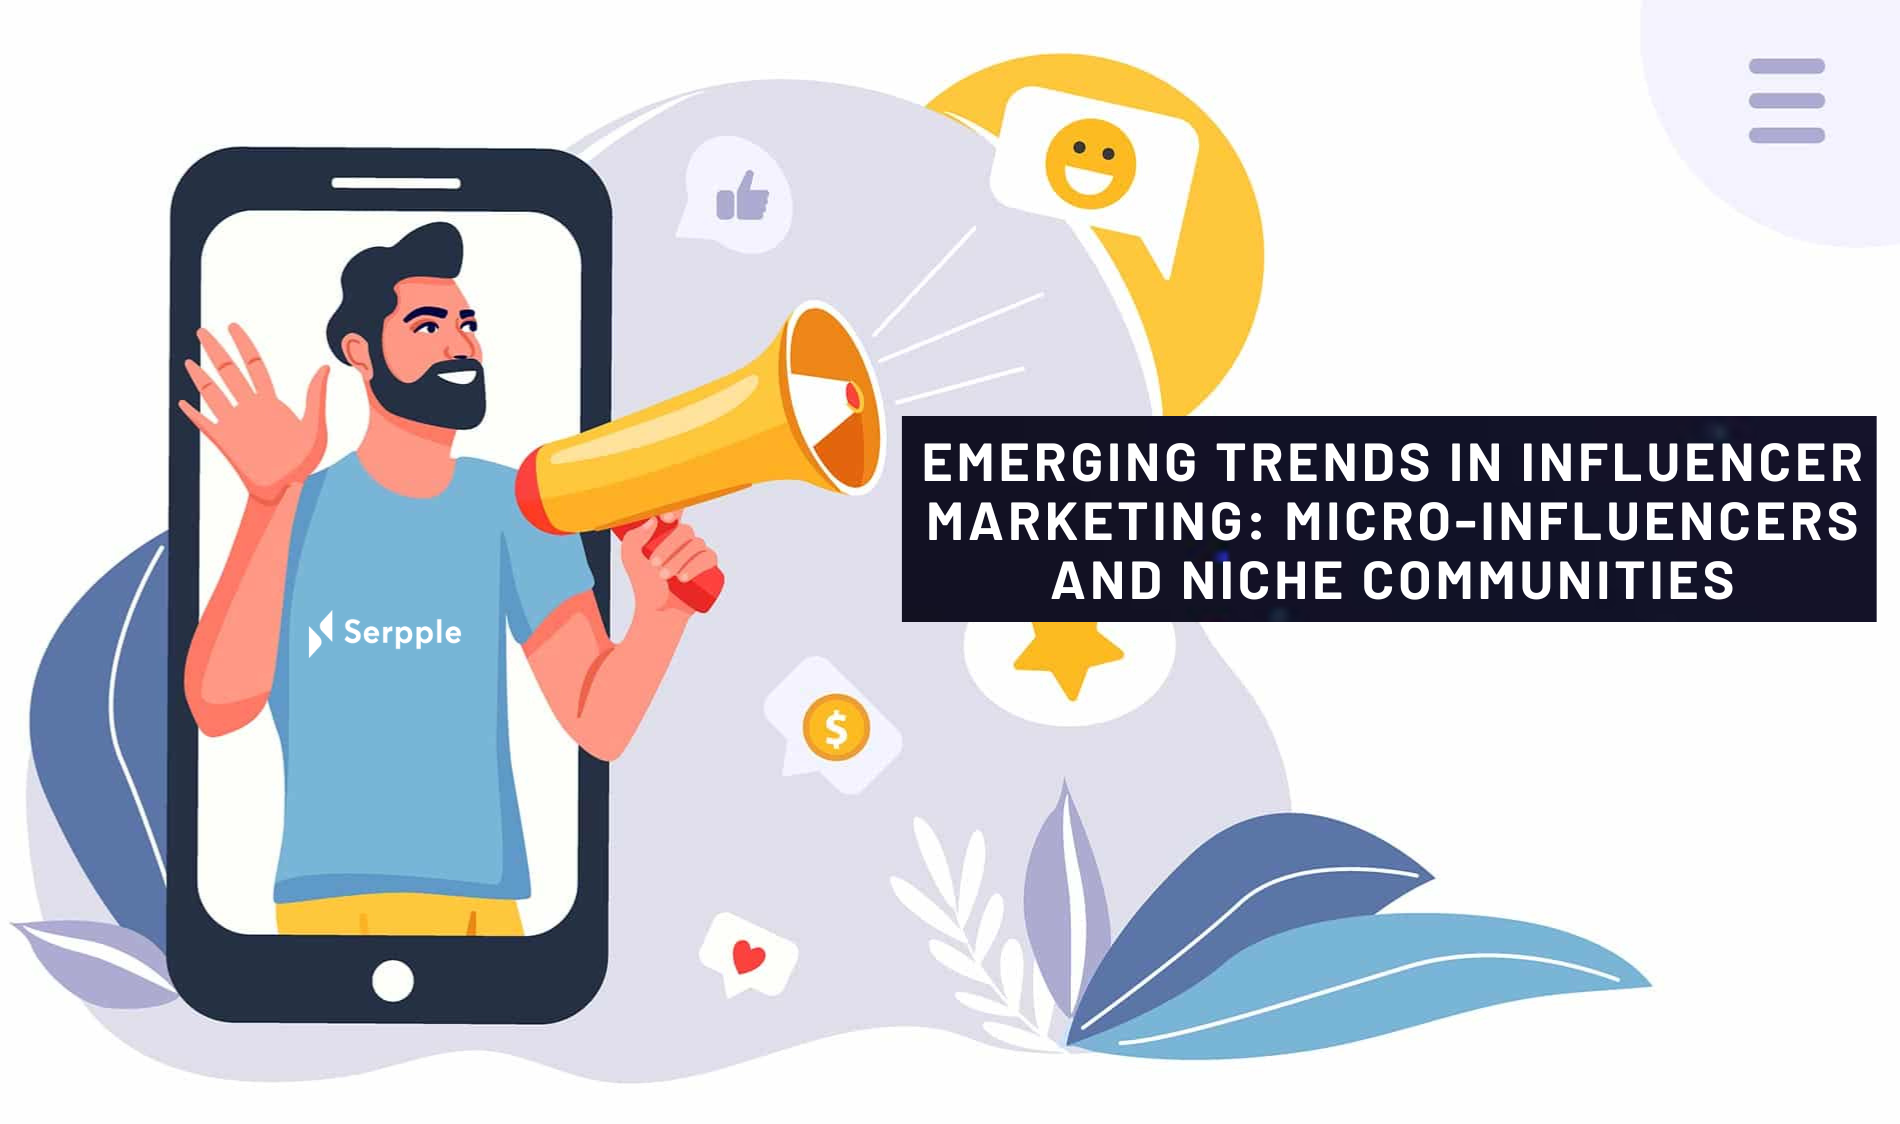 Emerging Trends in Influencer Marketing: Micro-Influencers and Niche Communities